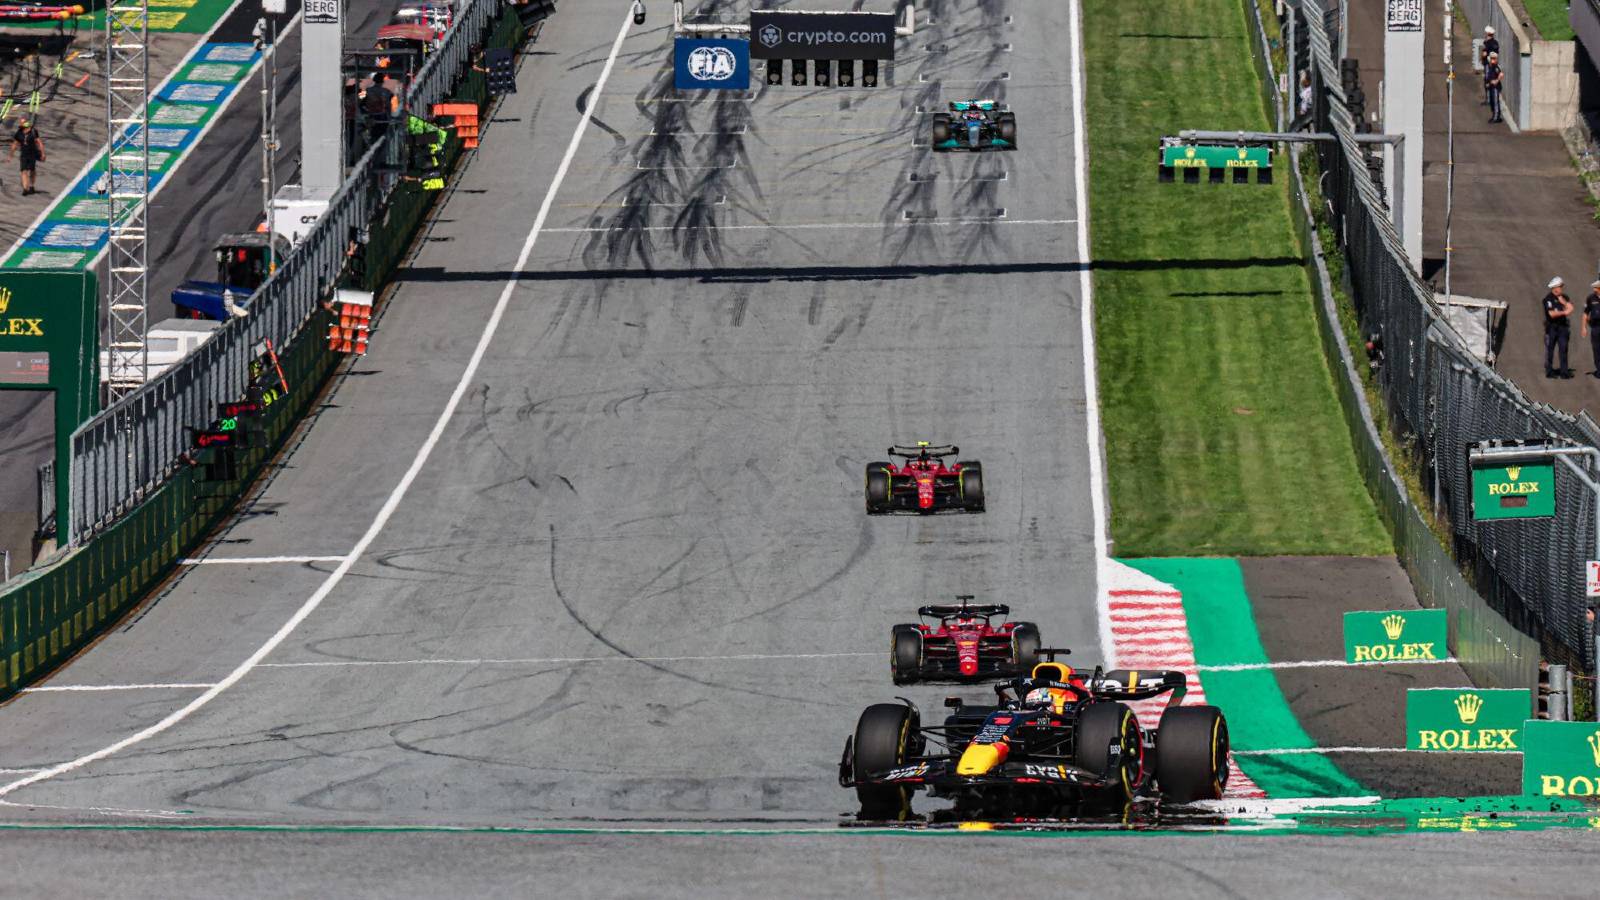 Max Verstappen leads sprint qualifying for the Austrian GP. Red Bull Ring July 2022.